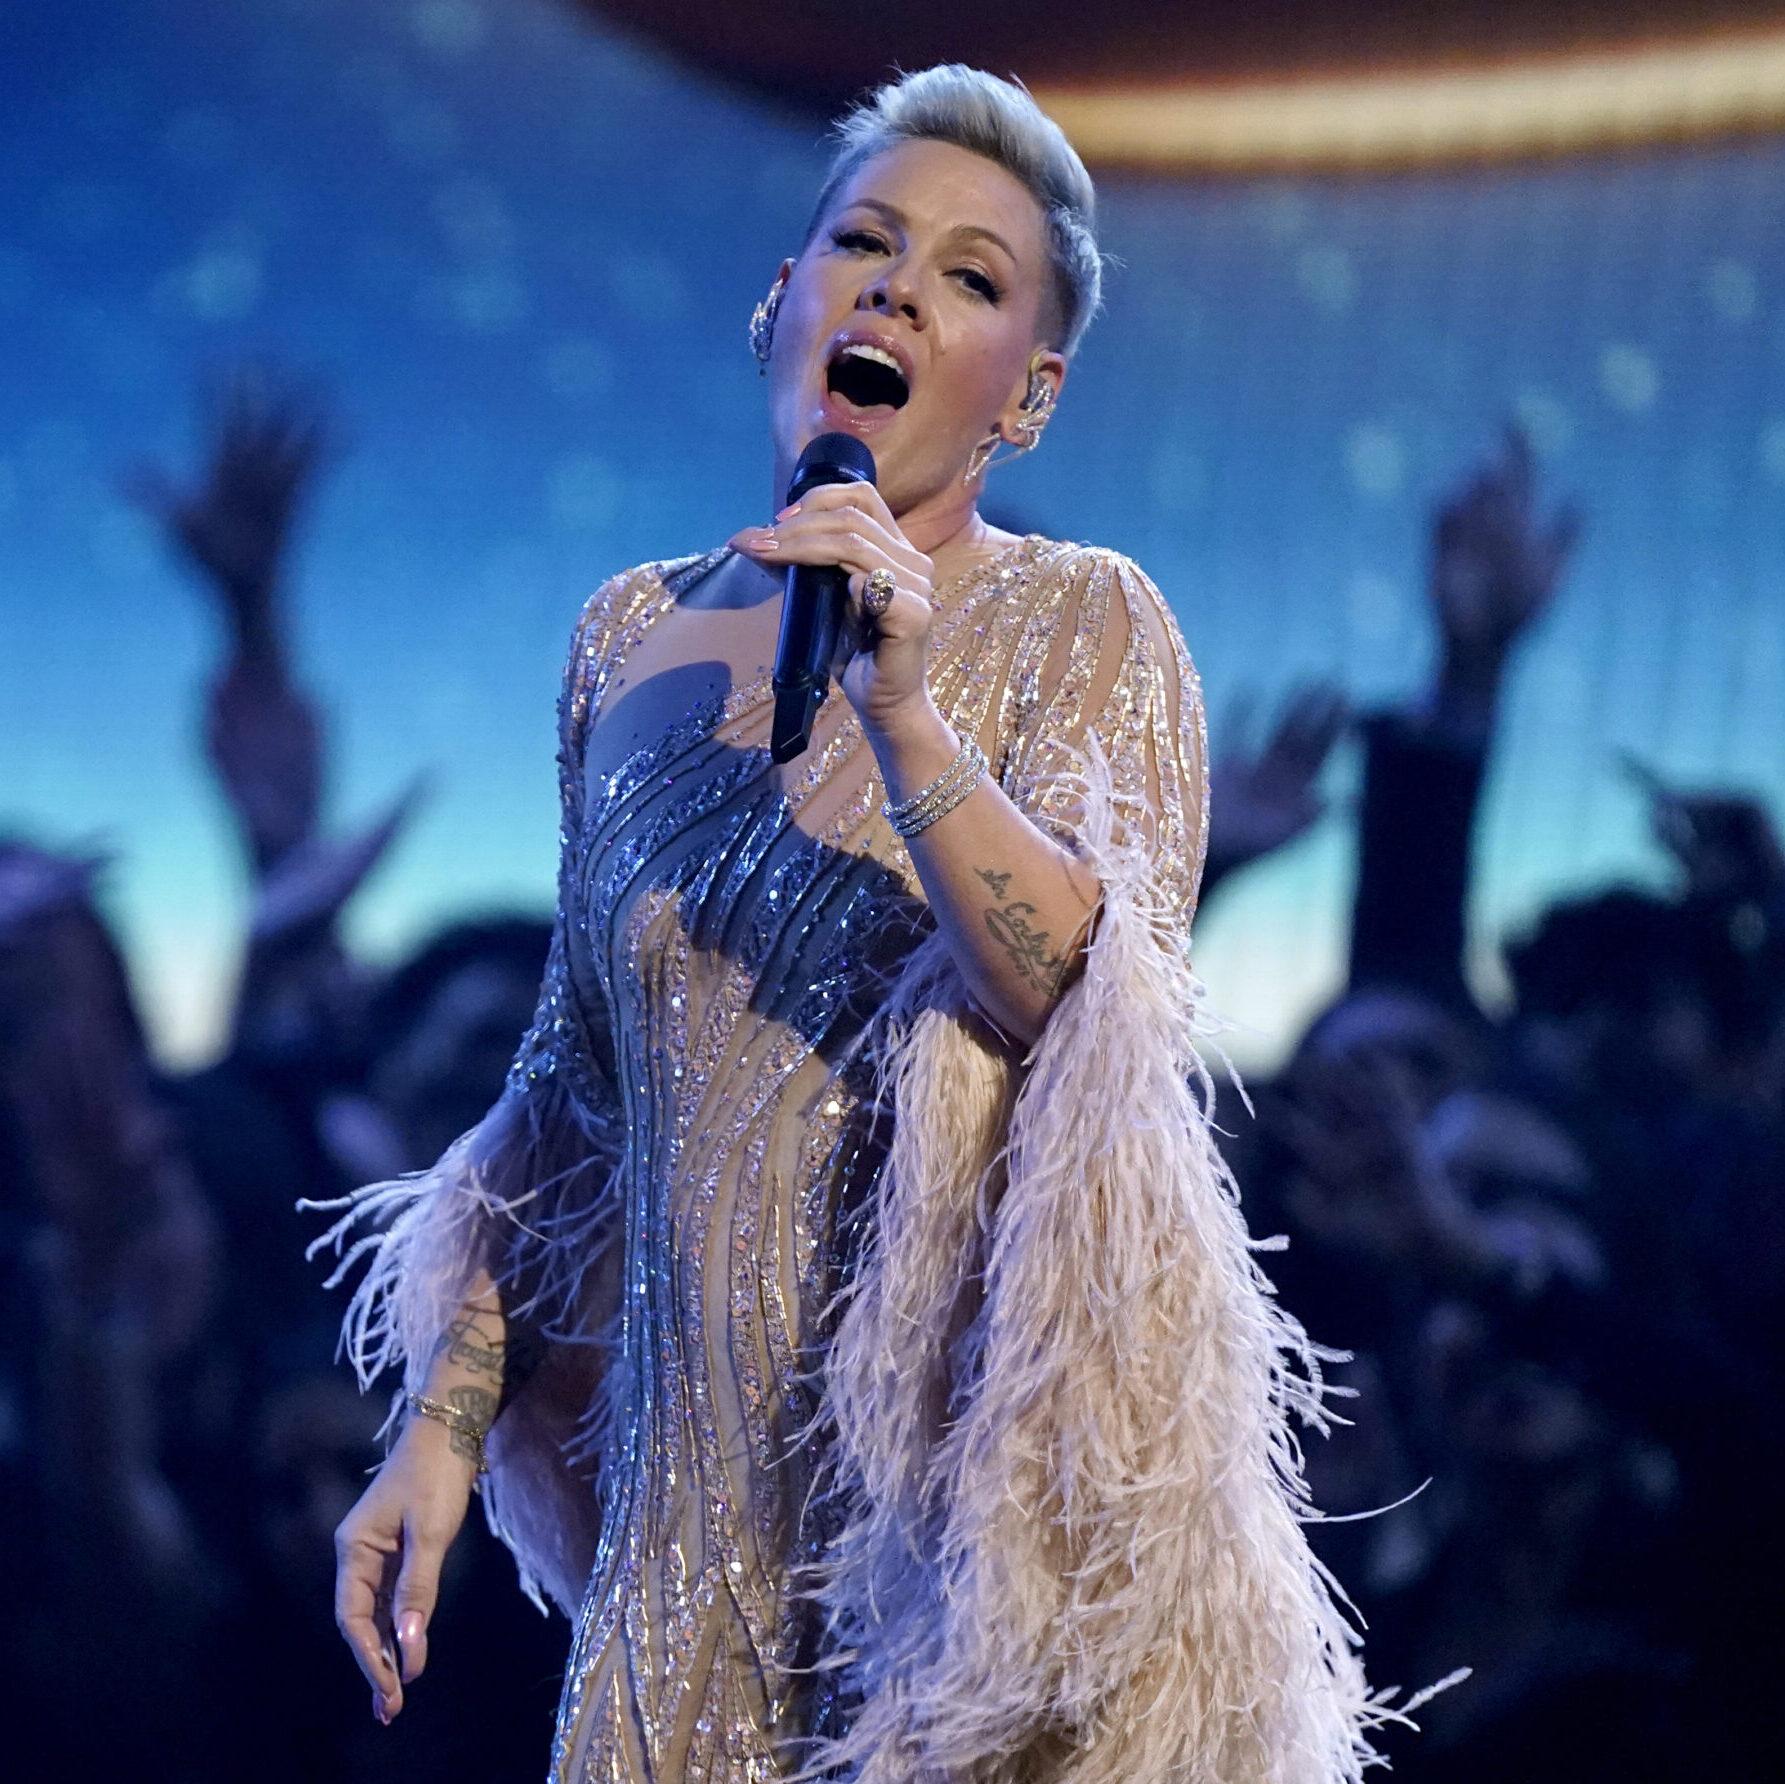 Pop artist Pink performing, with an audience seen in the background.